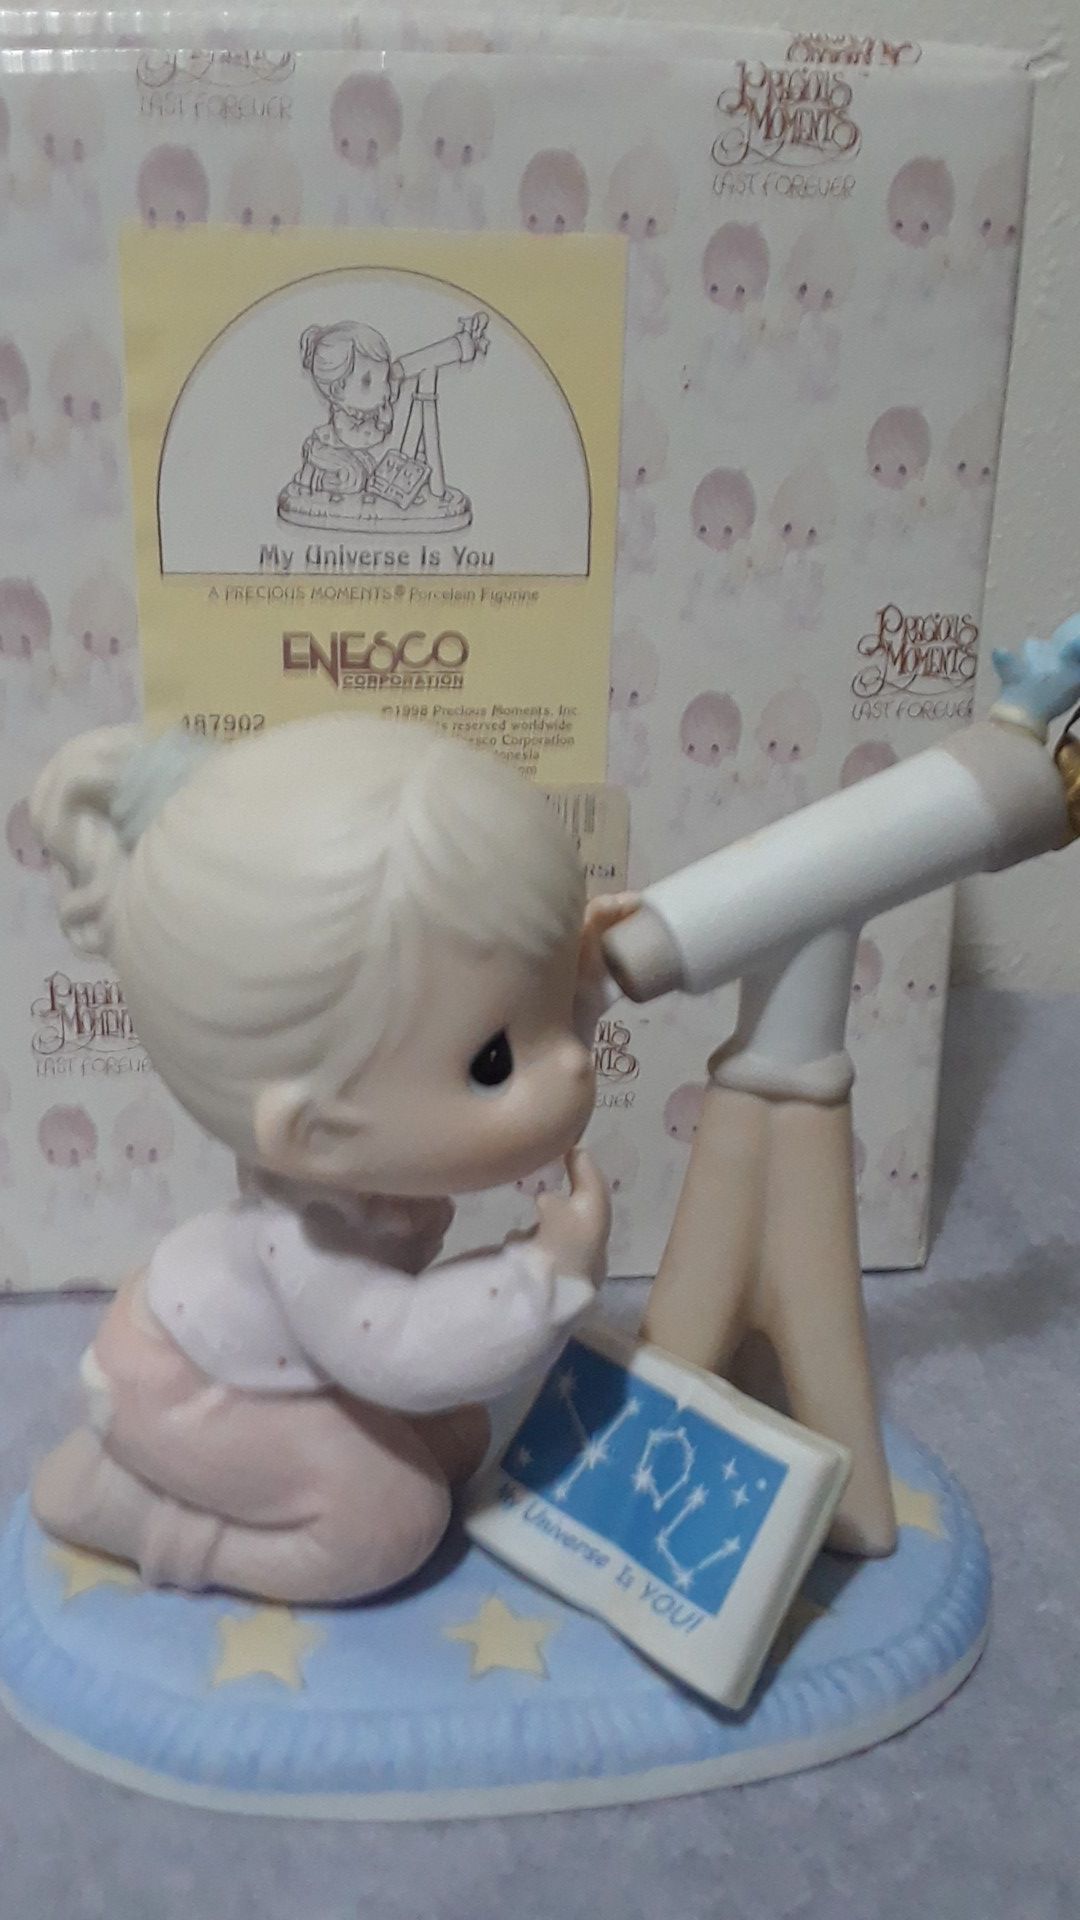 Precious Moments " My Universe is you " figurine